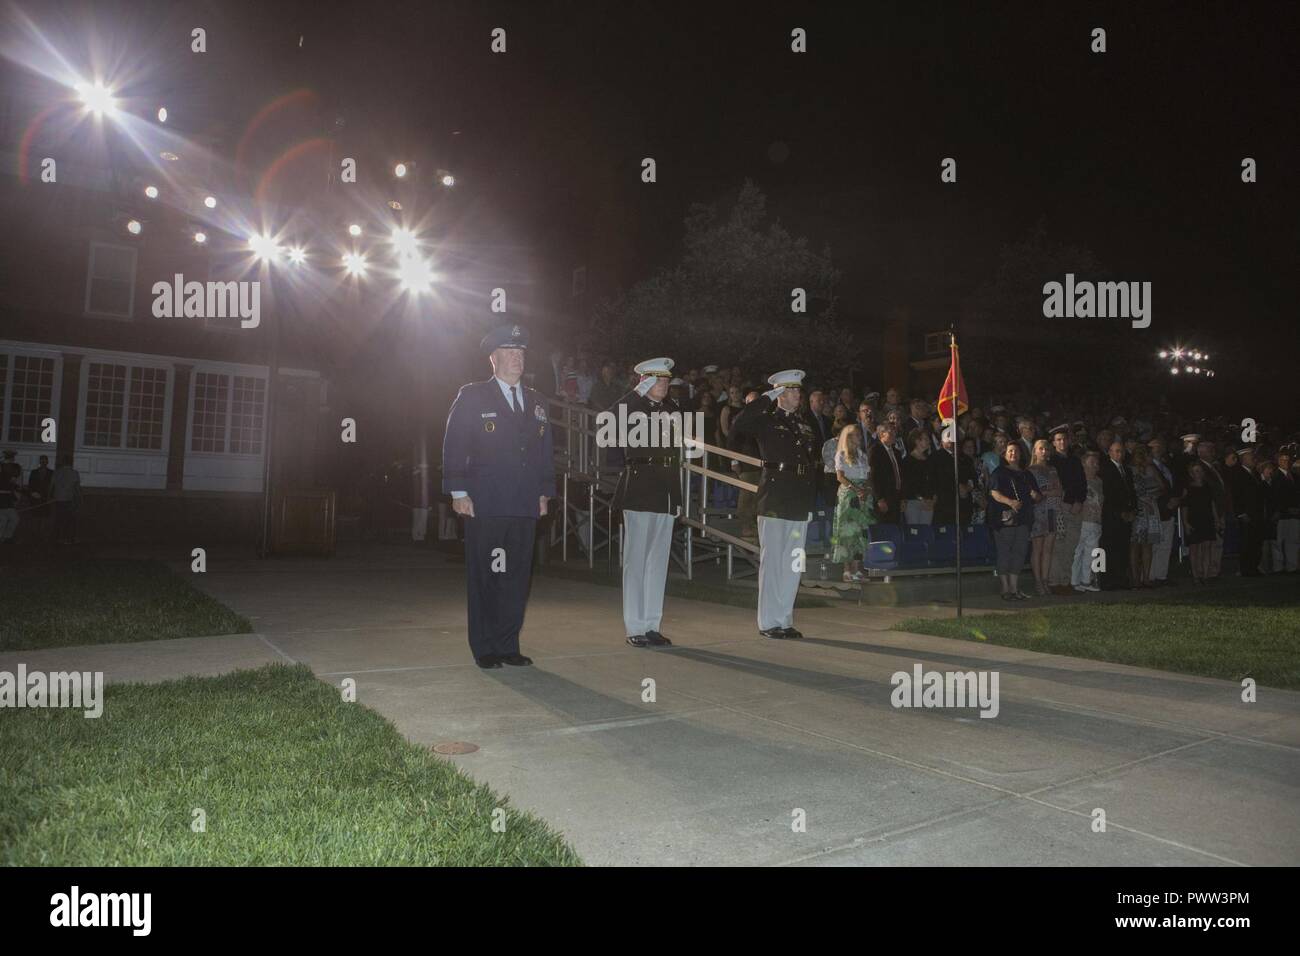 From left, U.S. Air Force Lt. Gen. Thomas J. Trask, vice commander of Headquarters U.S. Special Operations Command (SOCOM); Director Marine Corps Staff Lt. Gen. James B. Laster; and Col. Tyler J. Zagurski, commanding officer, Marine Barracks Washington, render honors during an evening parade at Marine Barracks Washington, Washington, D.C., June 23, 2017. Evening parades are held as a means of honoring senior officials, distinguished citizens and supporters of the Marine Corps. Stock Photo